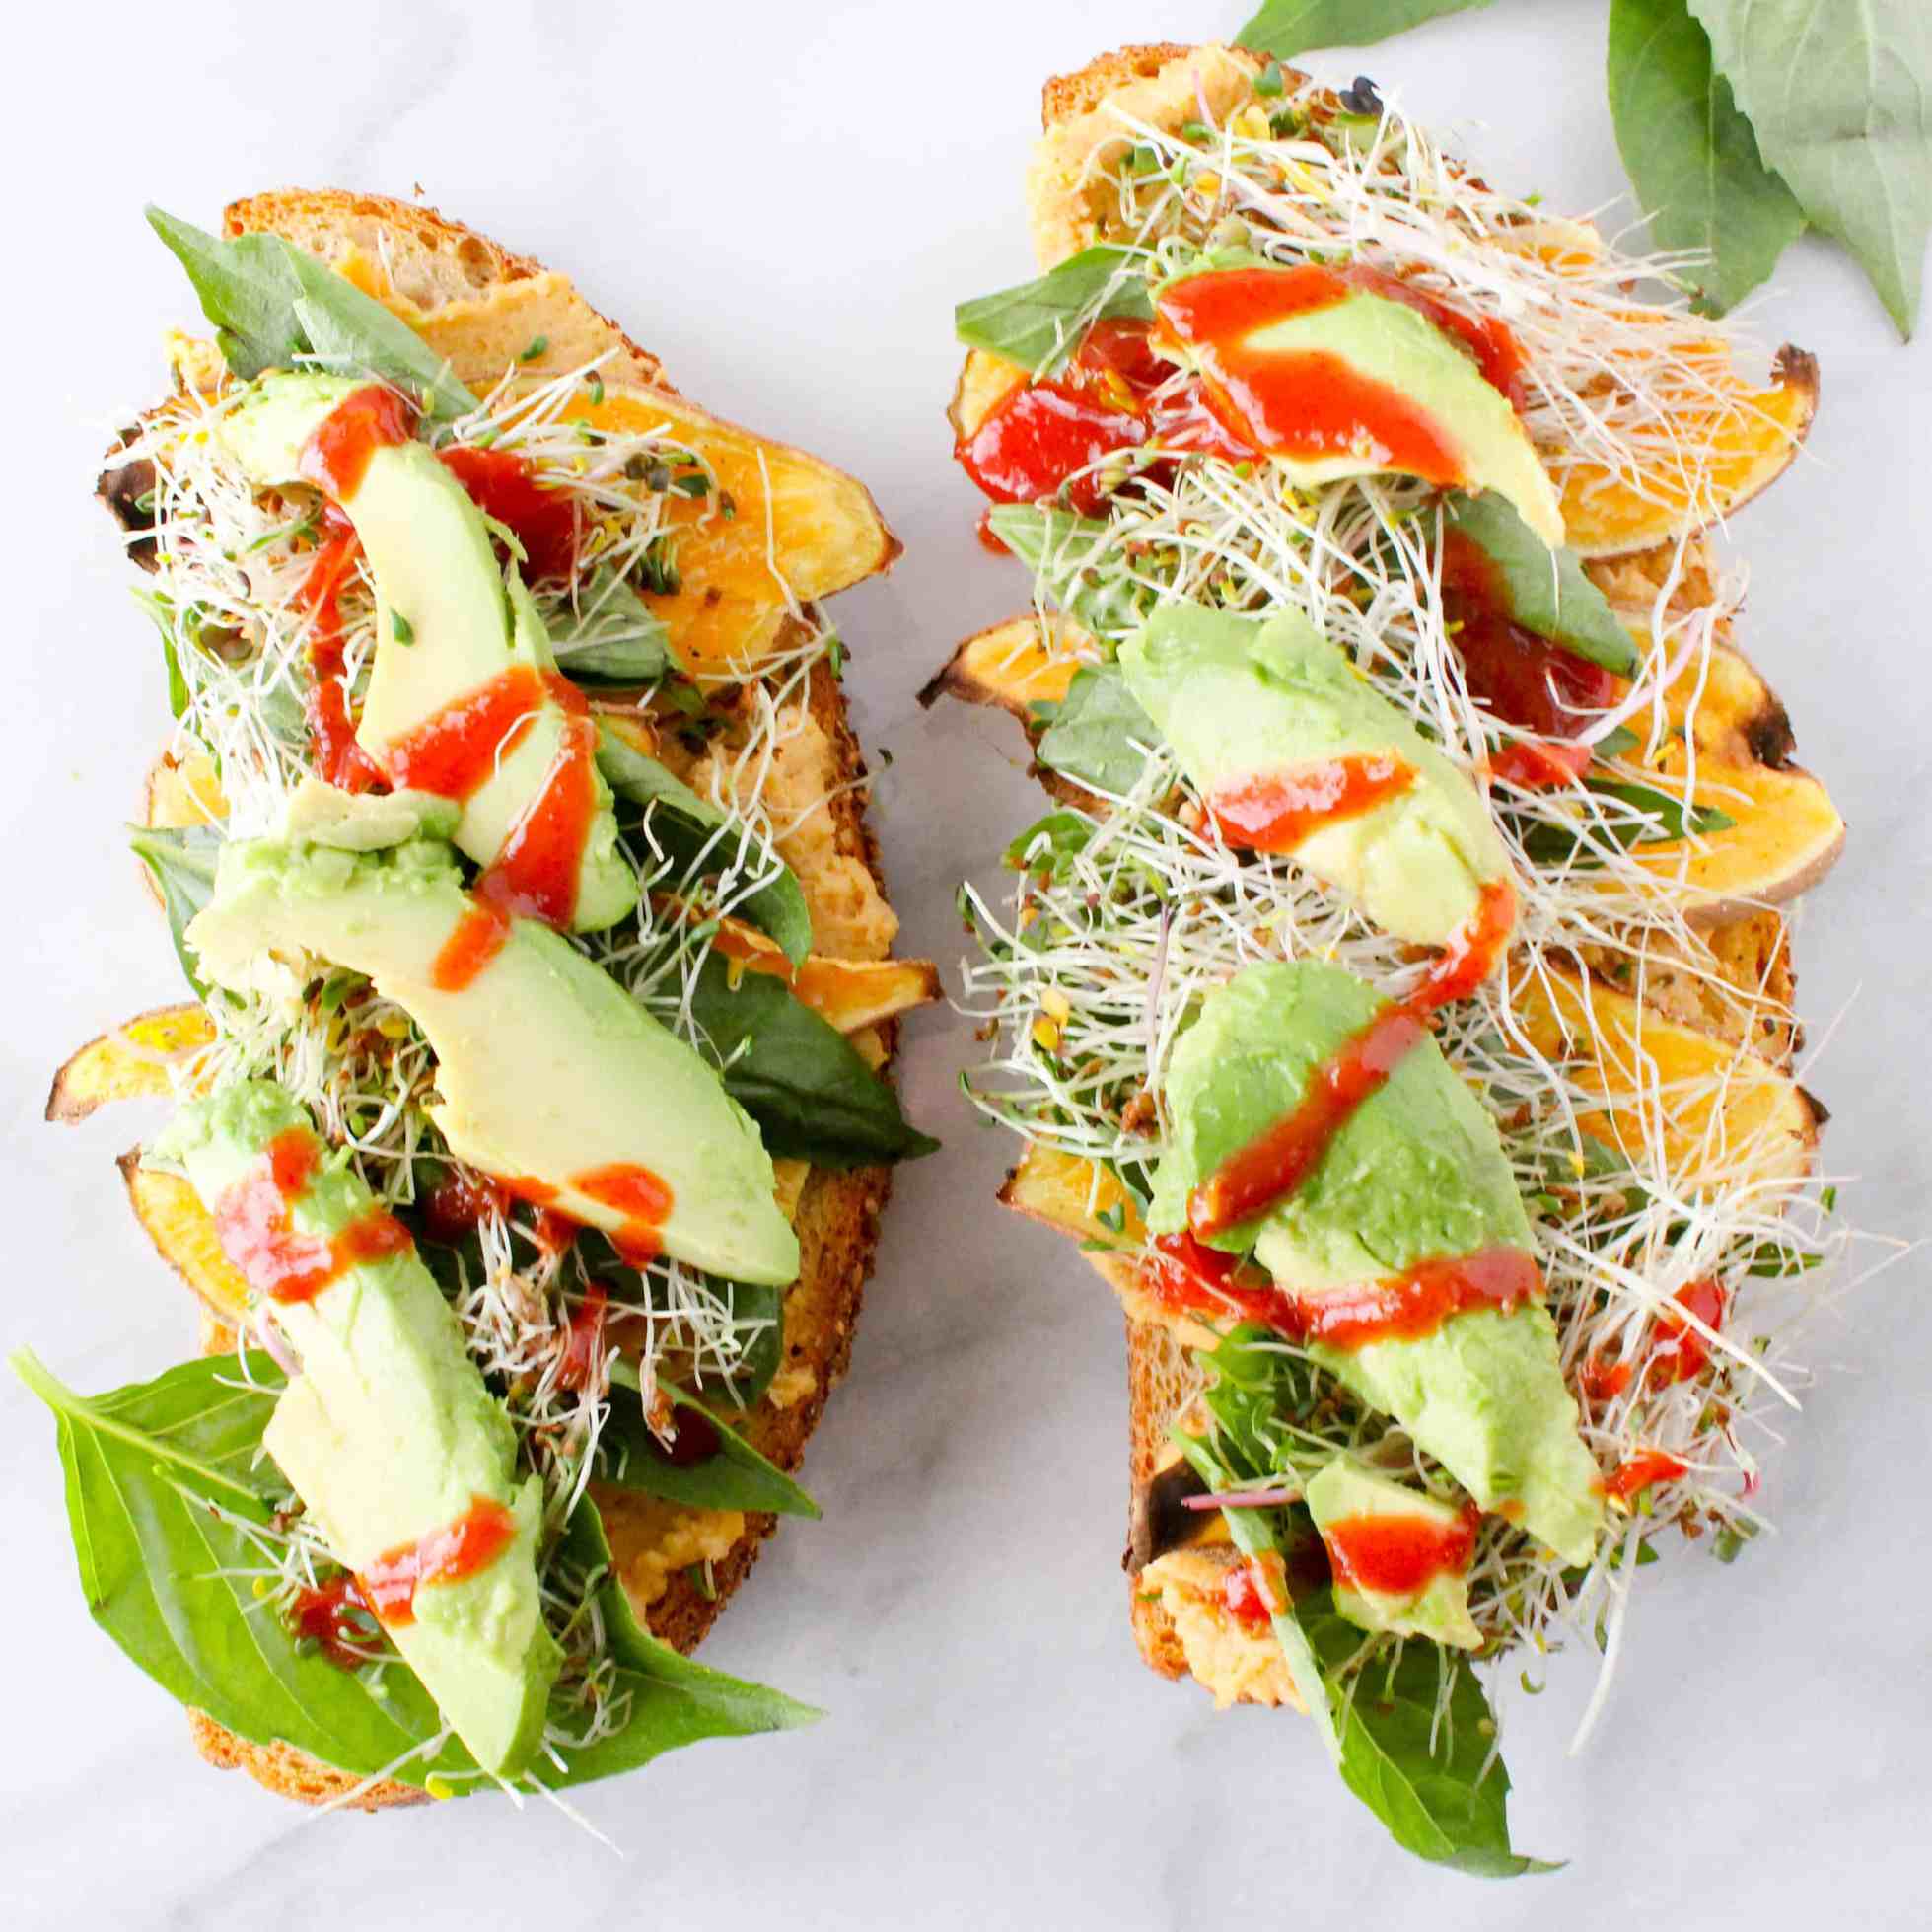 Open-faced sweet potato sandwich with avocado showing how to make easy college meals